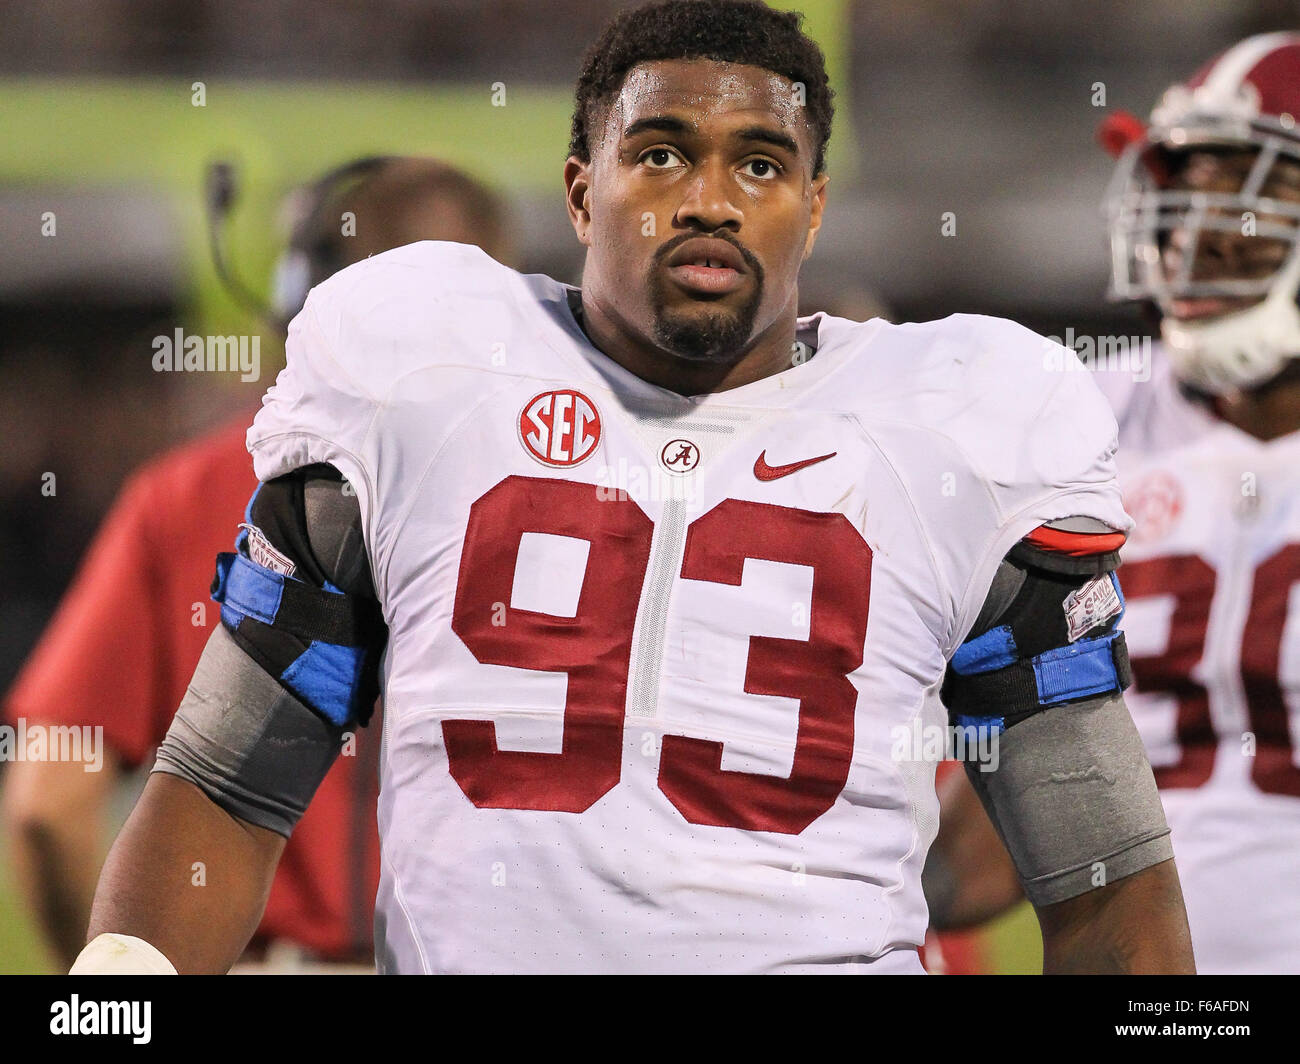 Starkville, MS, USA. 14th Nov, 2015. Alabama Crimson Tide defensive lineman Jonathan Allen (93) during the NCAA Football game between the Mississippi State Bulldogs and the Alabama Crimson Tide at Davis Wade Stadium in Starkville, MS. Chuck Lick/CSM/Alamy Live News Stock Photo